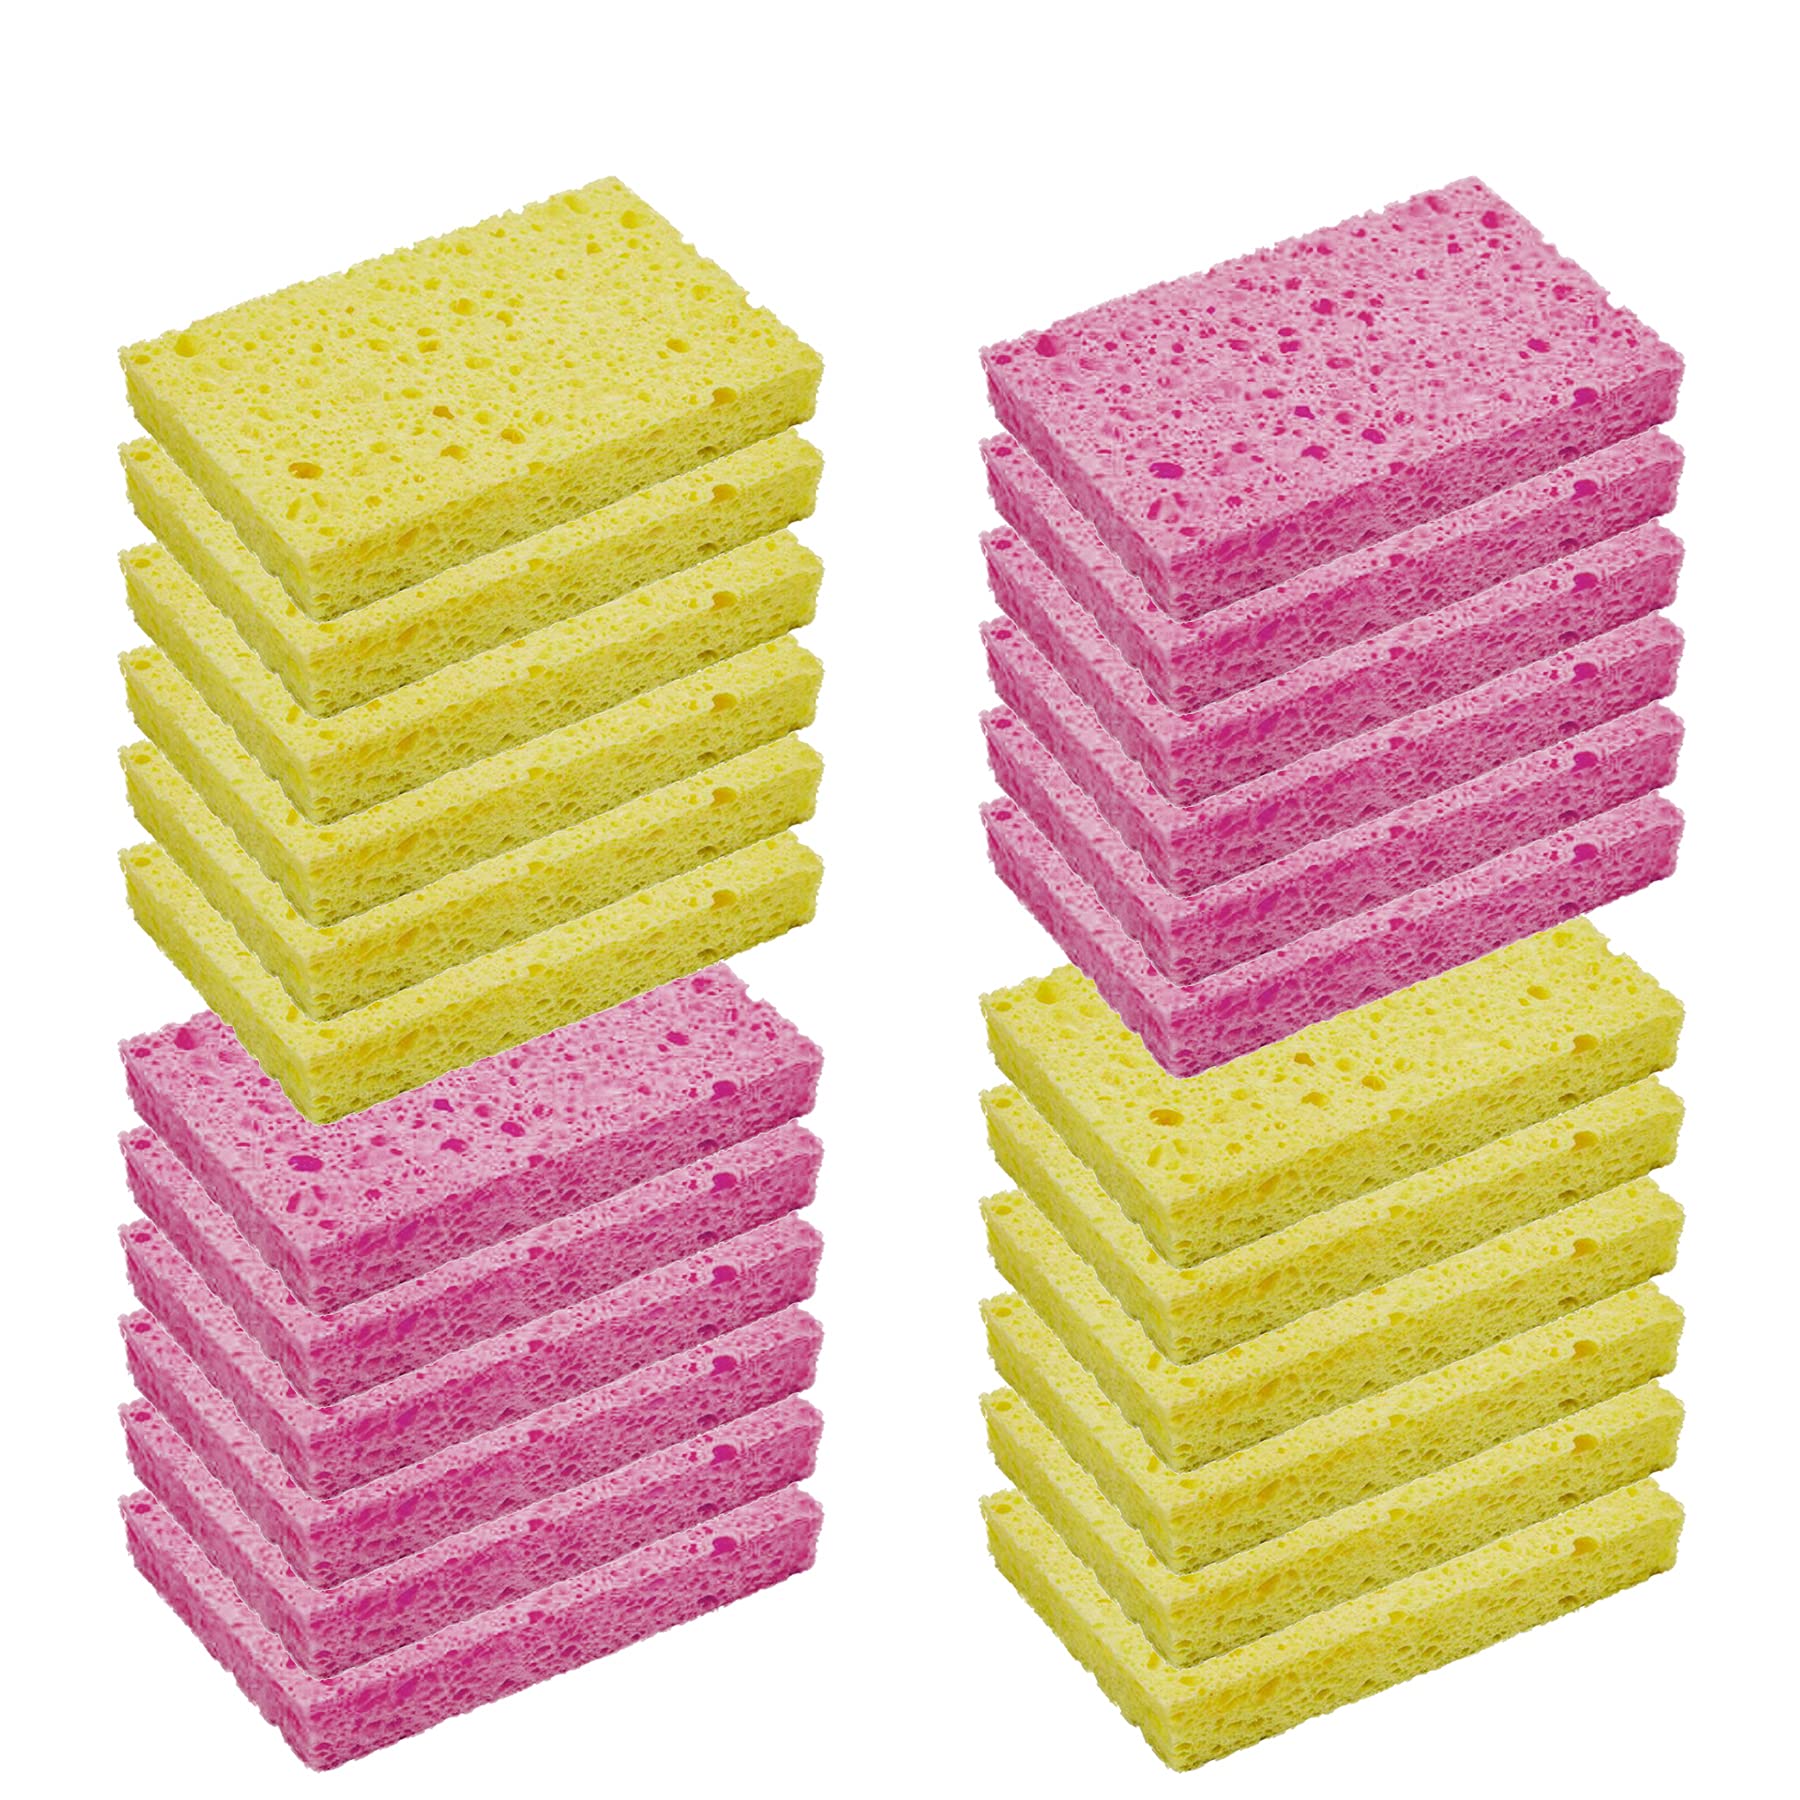 EVSOFMLF Silicone Sponge 9 Pack Sponges for Dishes 9 Pack-New, Multicolor